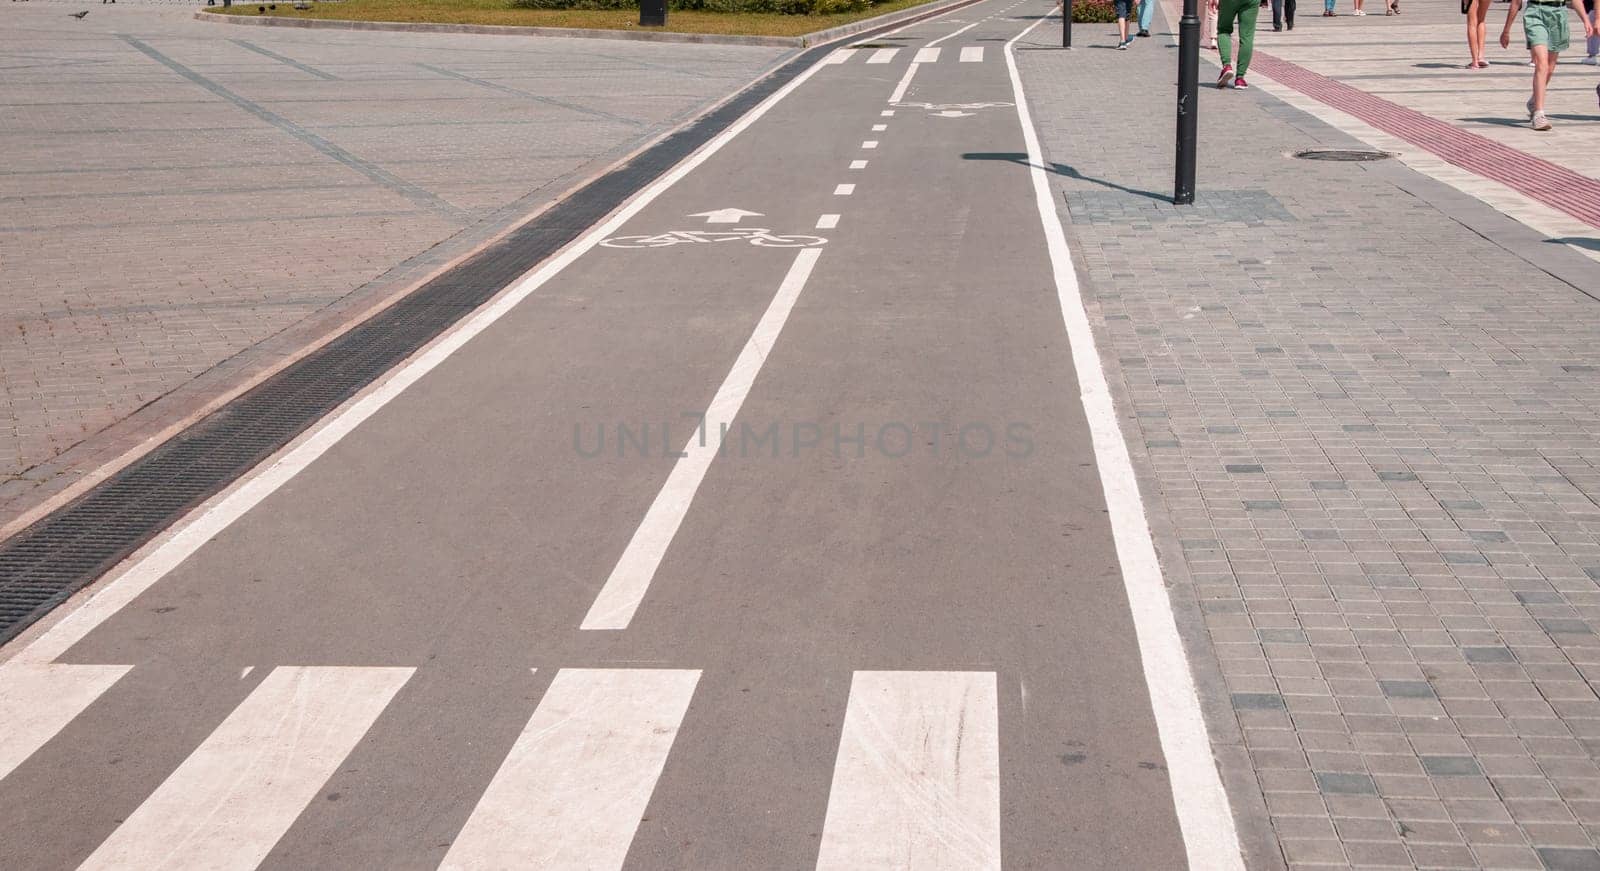 A sign of a bicycle path and pedestrian crossing on the asphalt in a city park, close-up.